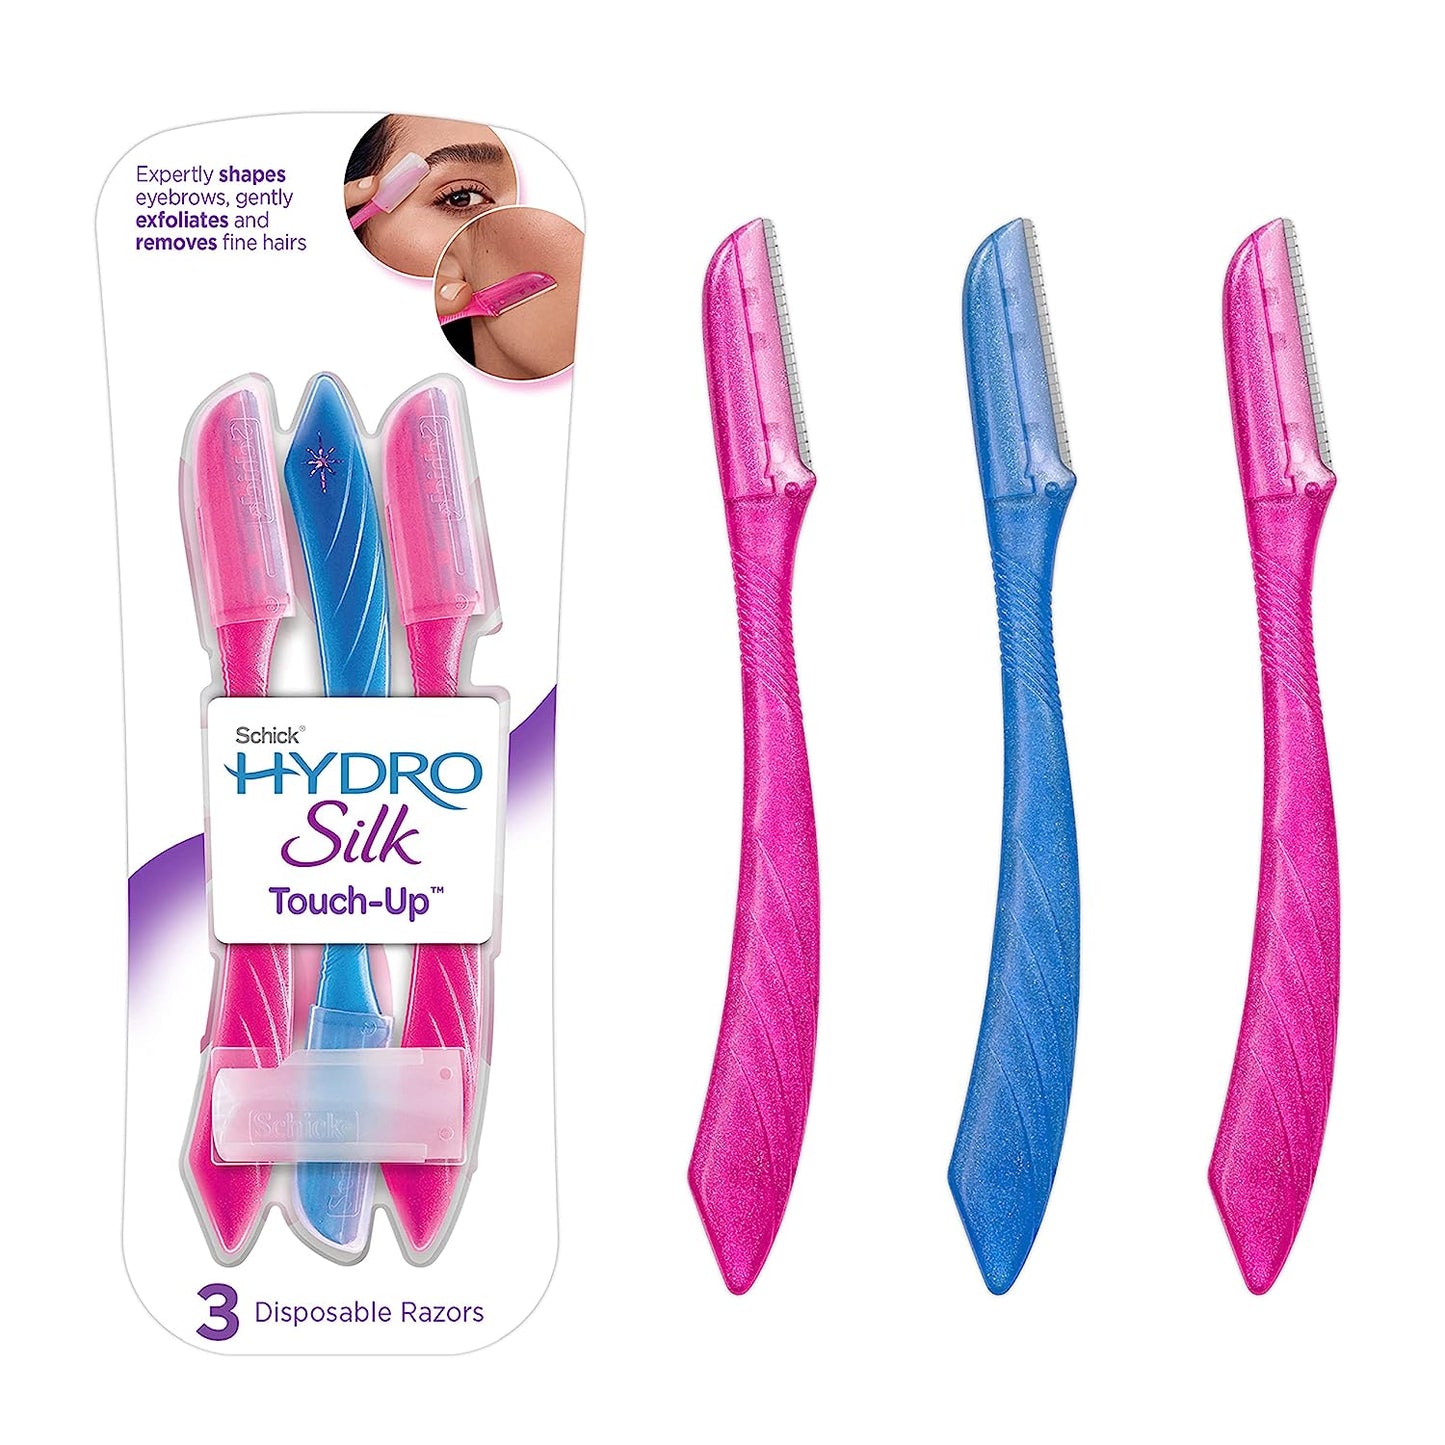 Uniites.com™, Schick Hydro Silk Touch-Up Exfoliating Dermaplaning Tool, Face & Eyebrow Razor with Precision Cover - 3 Count Dermaplaning Razor For Women $5.91